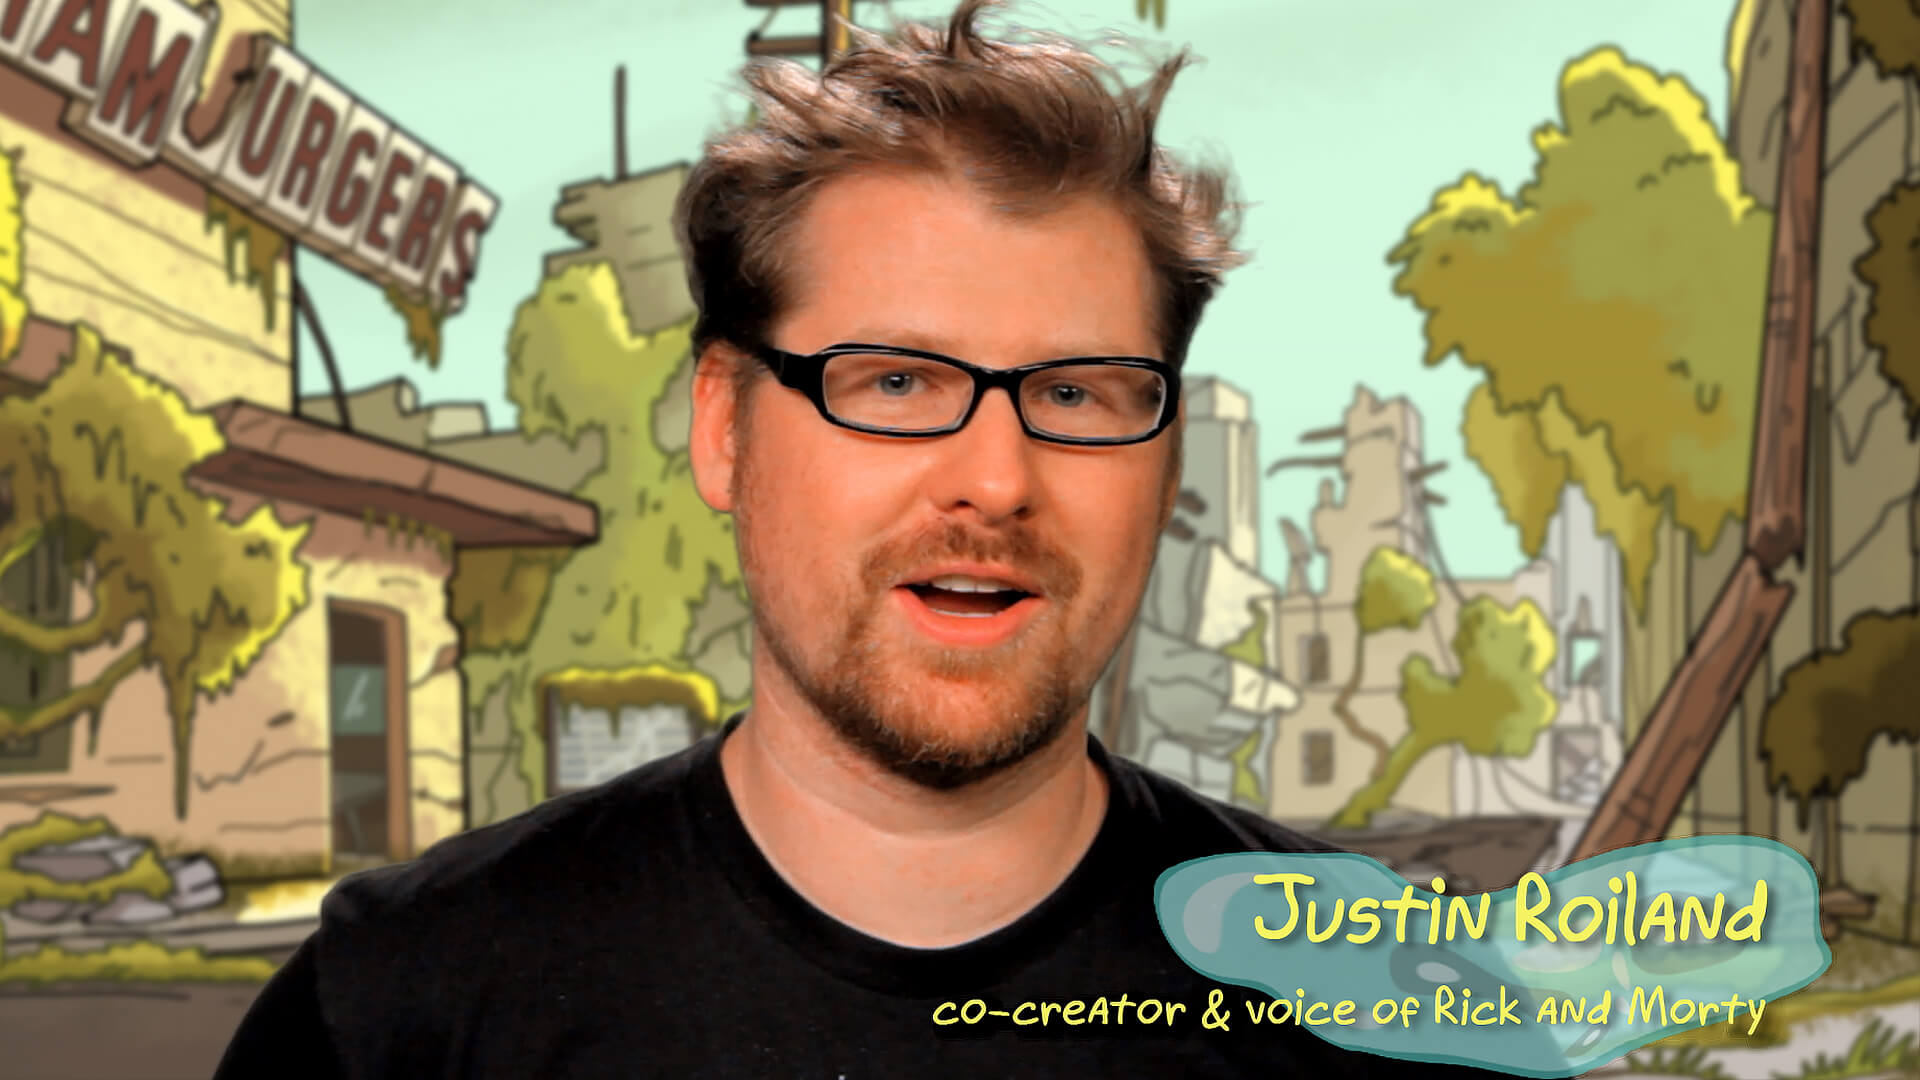 Rick and Morty co-creator Justin Roiland in a segment from the Rick and Morty blu-ray behind-the-scenes produced by Todd Bishop